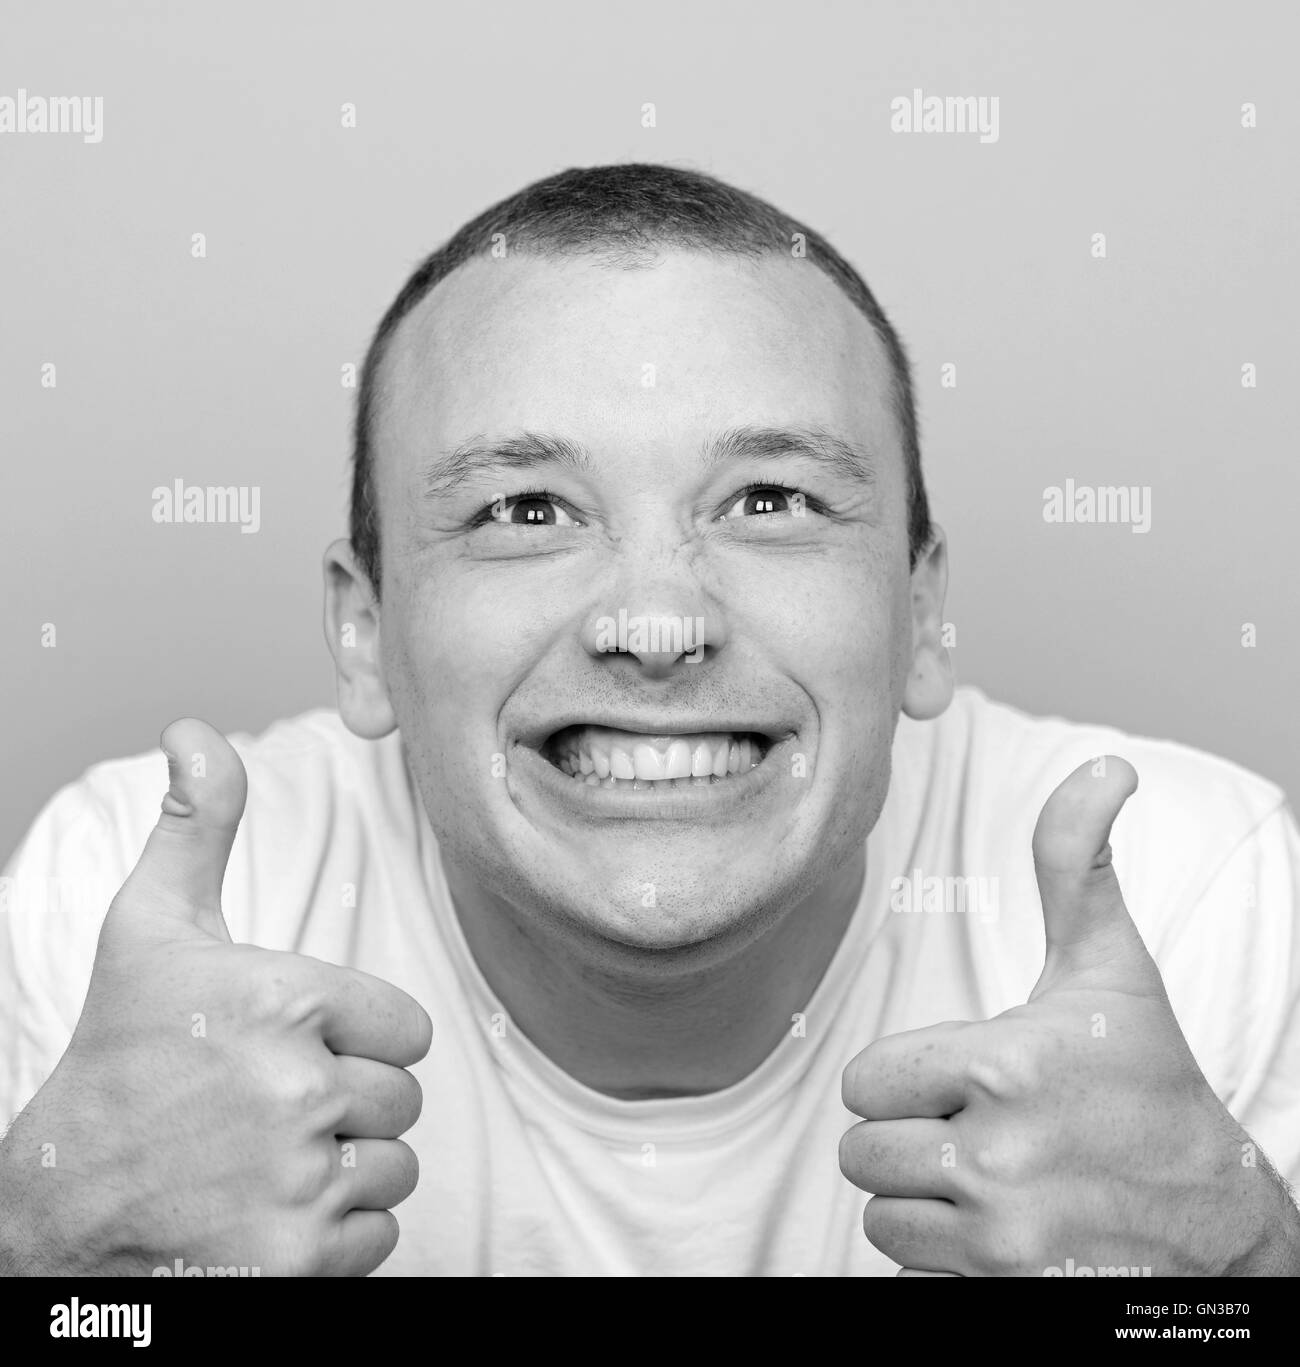 Portrait of with funny expression holding thumbs up against green background Stock Photo